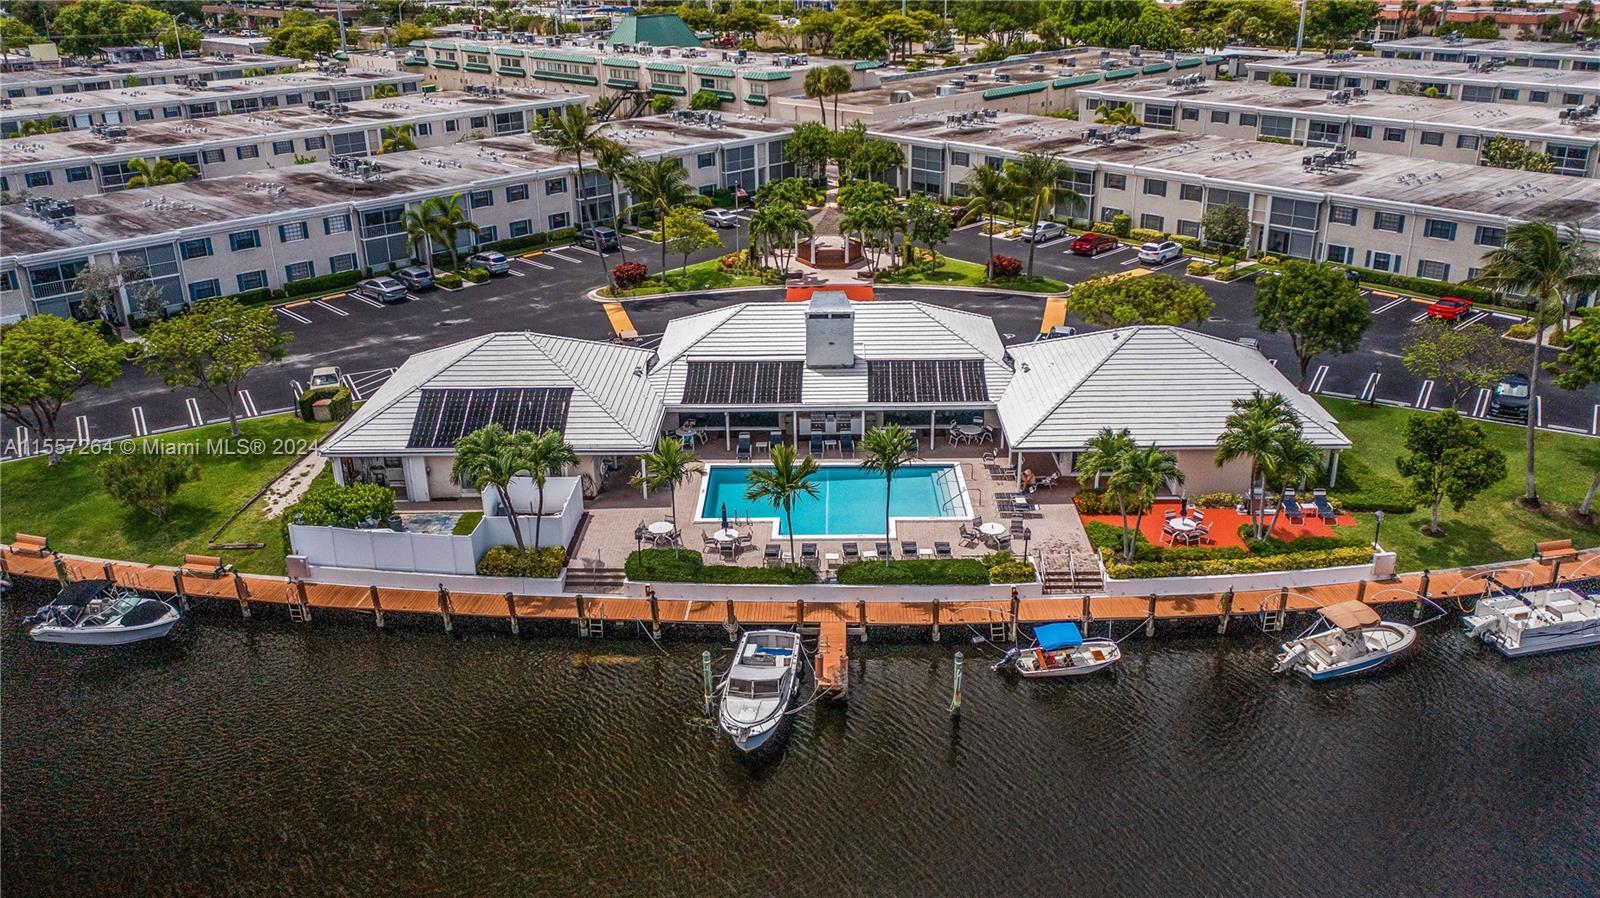 Enjoy the Florida lifestyle in this perfectly appointed waterfront community. This fully-furnished, 